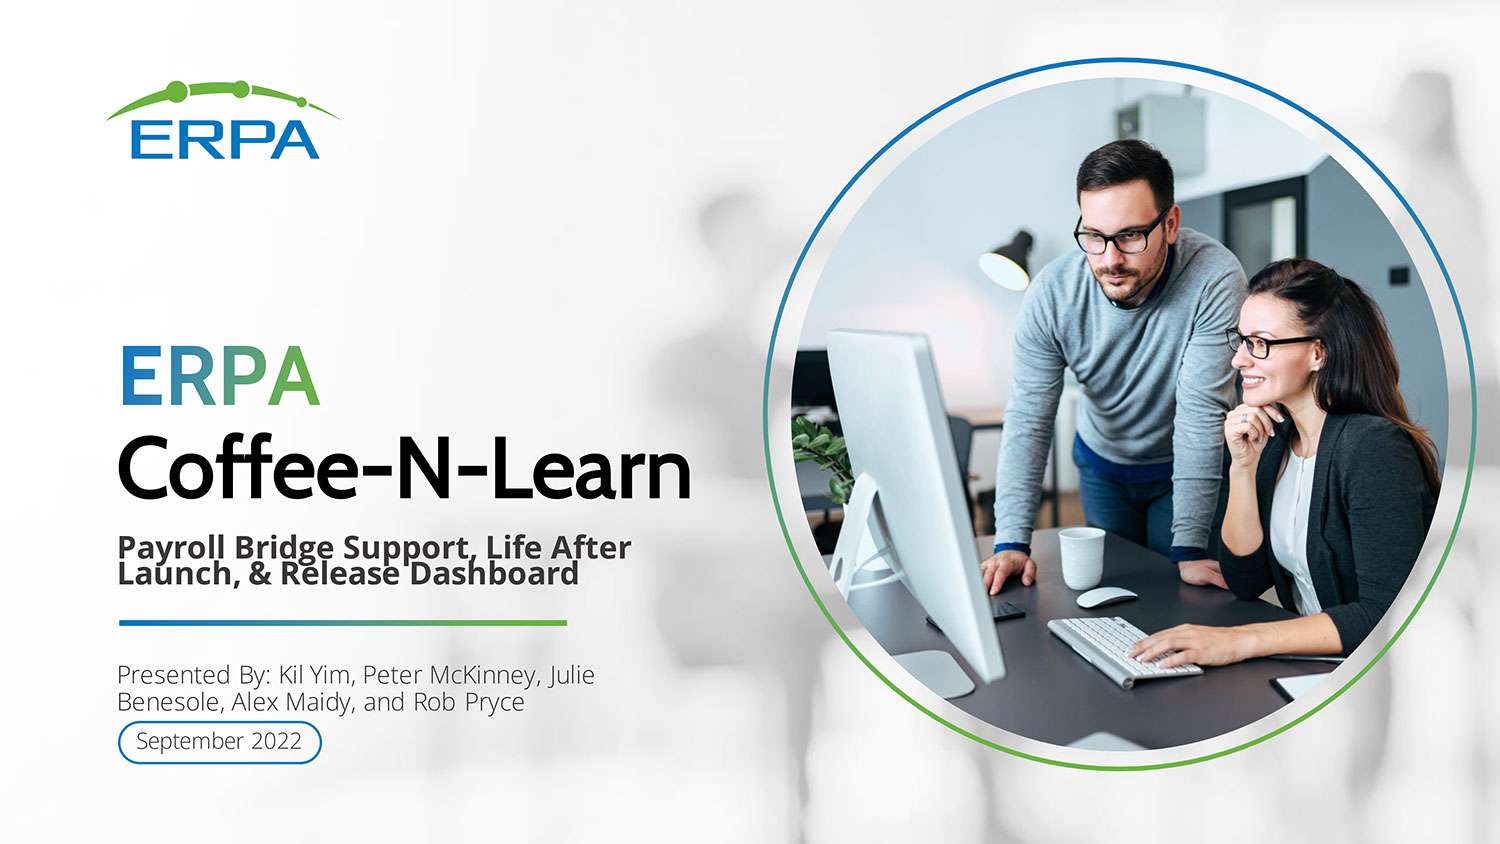 ERPA Webinar: Coffee-N-Learn: Payroll Bridge Support, Life After Launch, and Release Dashboard